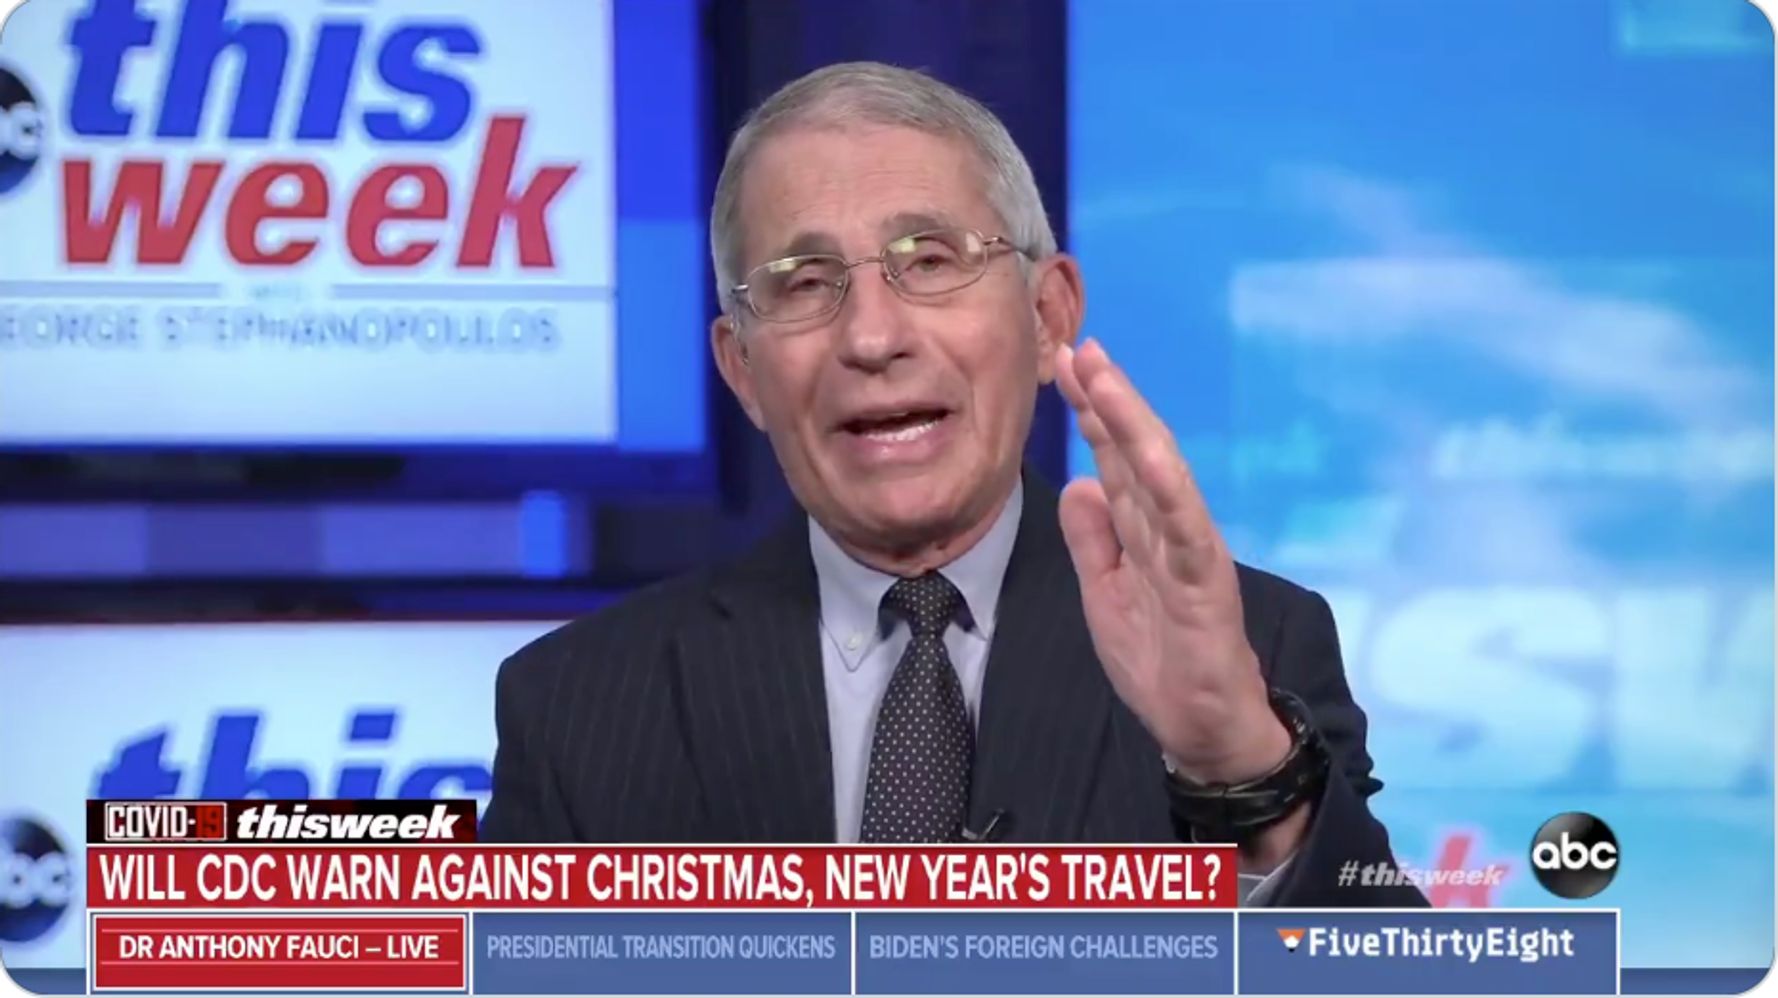 Fauci Warns Of COVID-19 ‘Surge Upon A Surge’ As Millions Travel Over Holidays